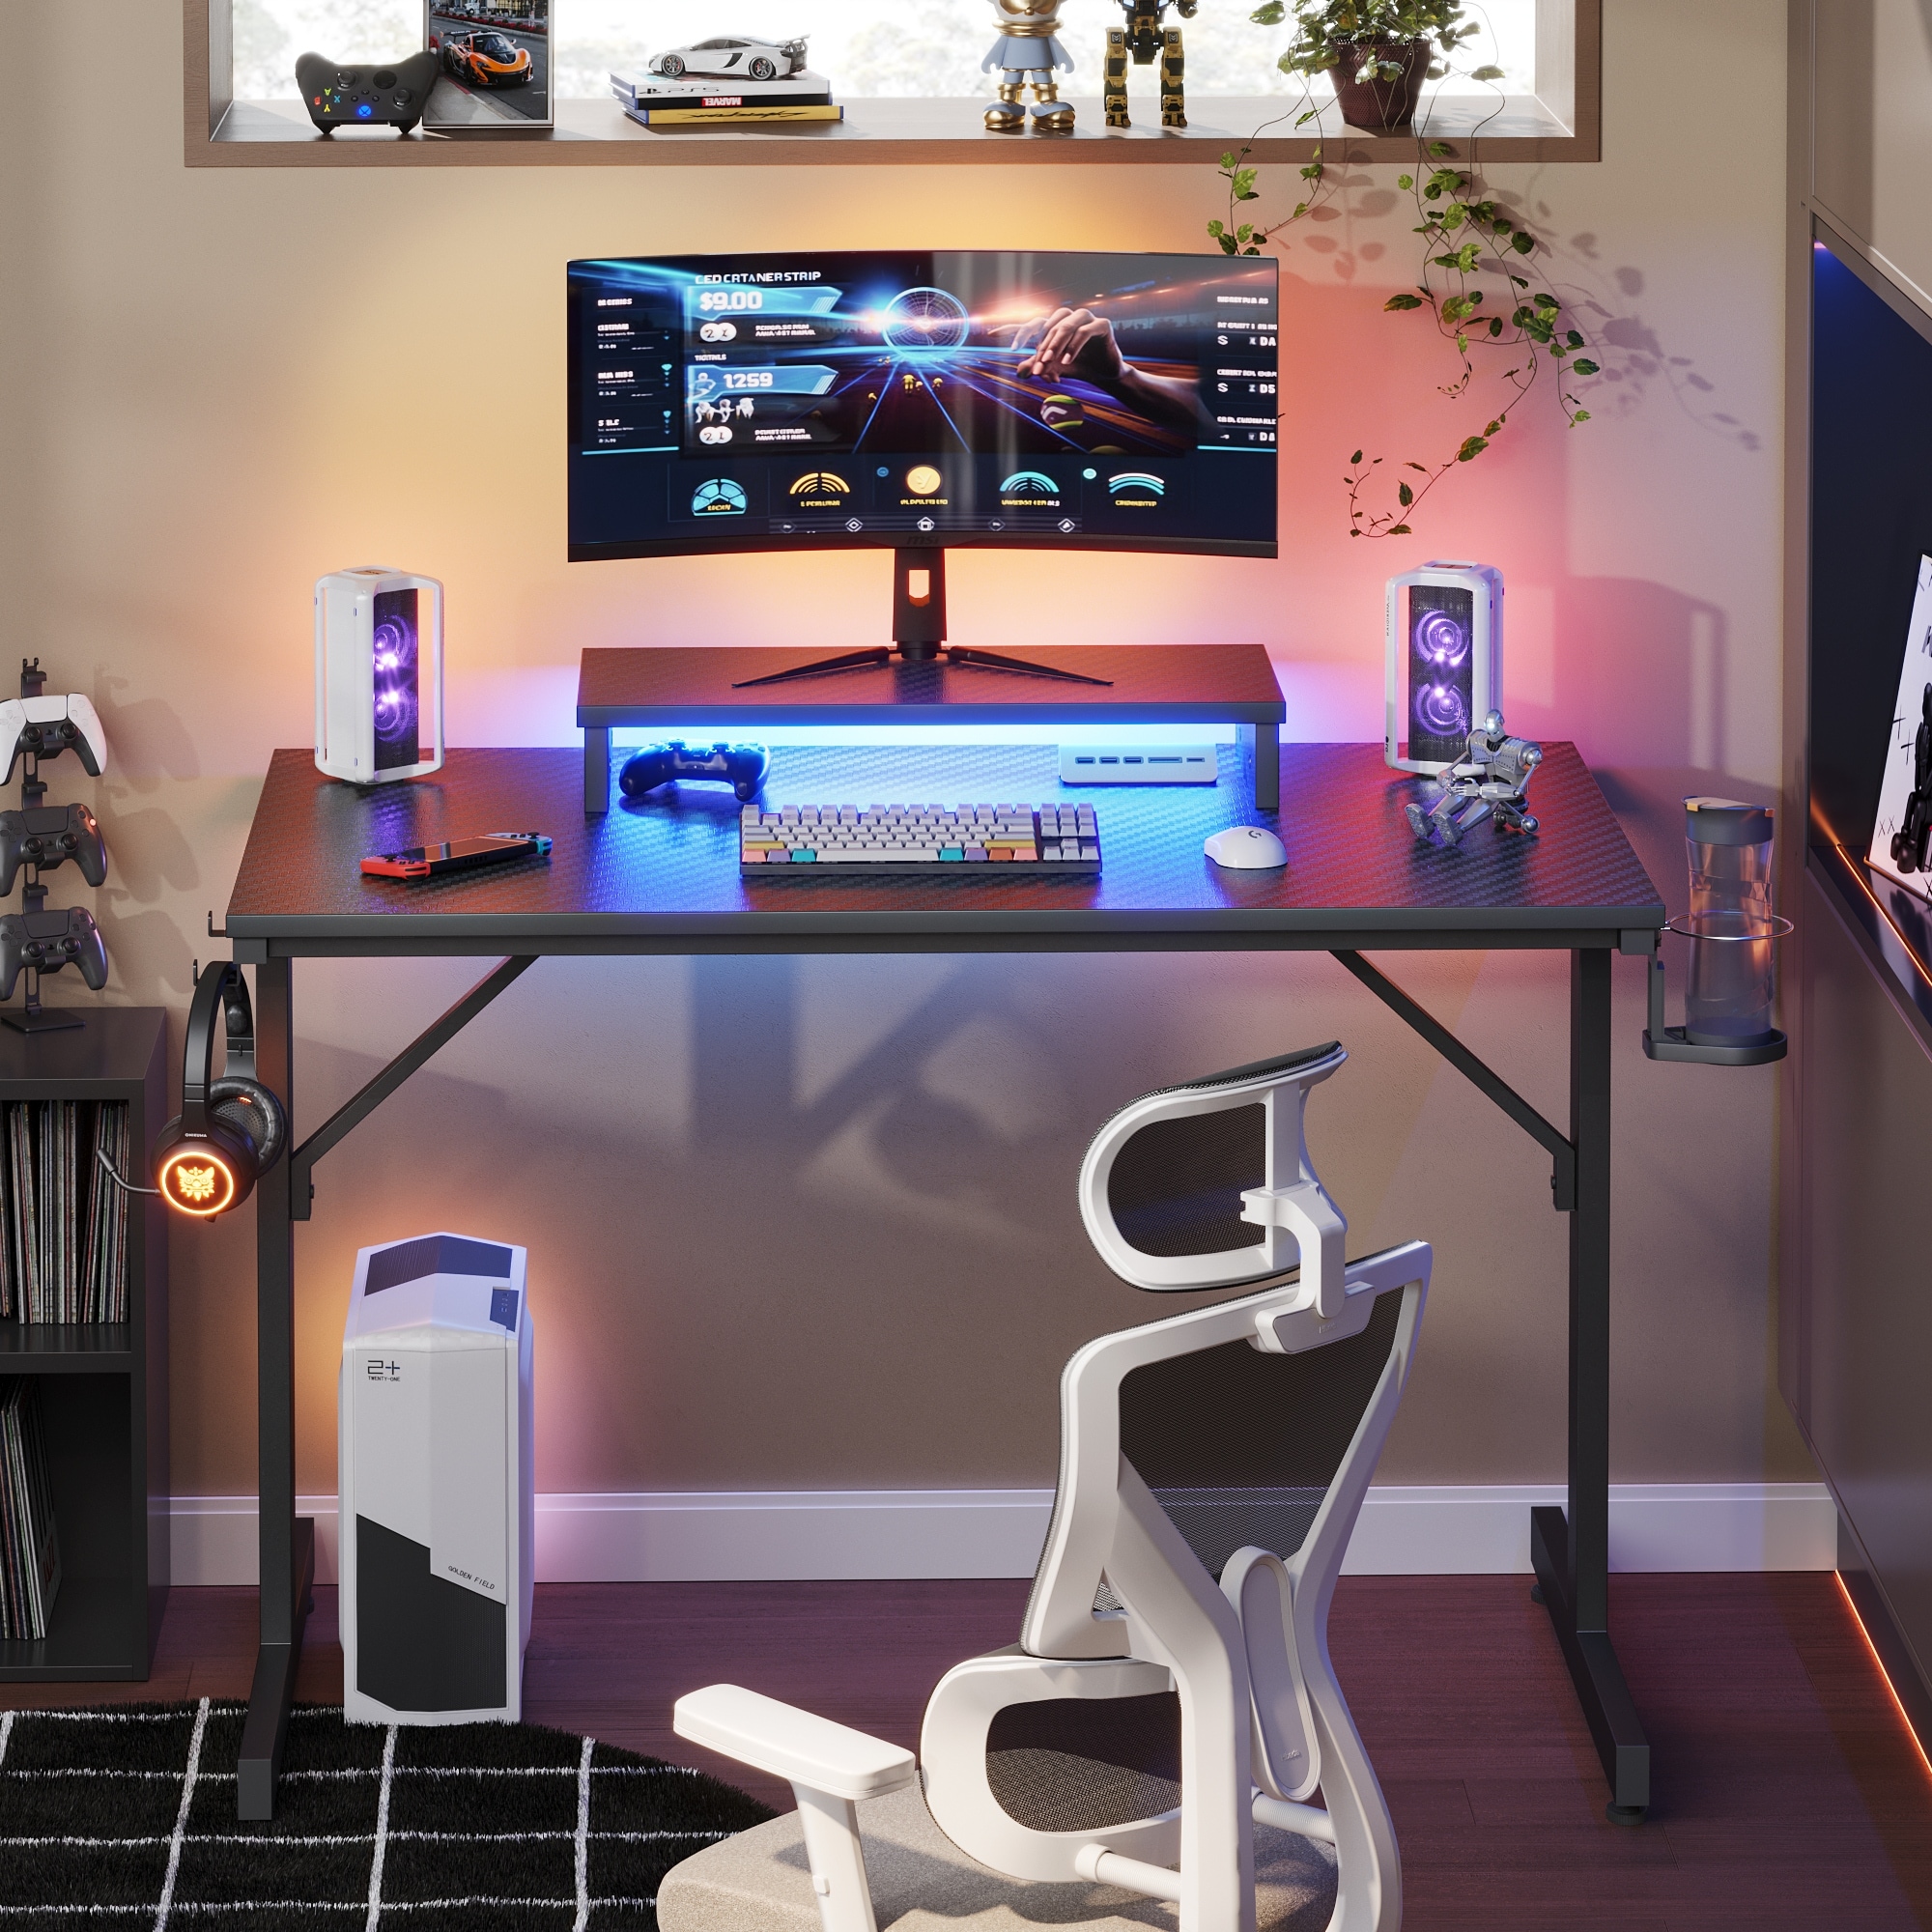 https://ak1.ostkcdn.com/images/products/is/images/direct/bfb9ece47ae321878b4d052483d5582a3c3e5952/42-inch-Gaming-Desk-LED-Computer-Table-with-Monitor-Stand-%26-Cup-Holder.jpg